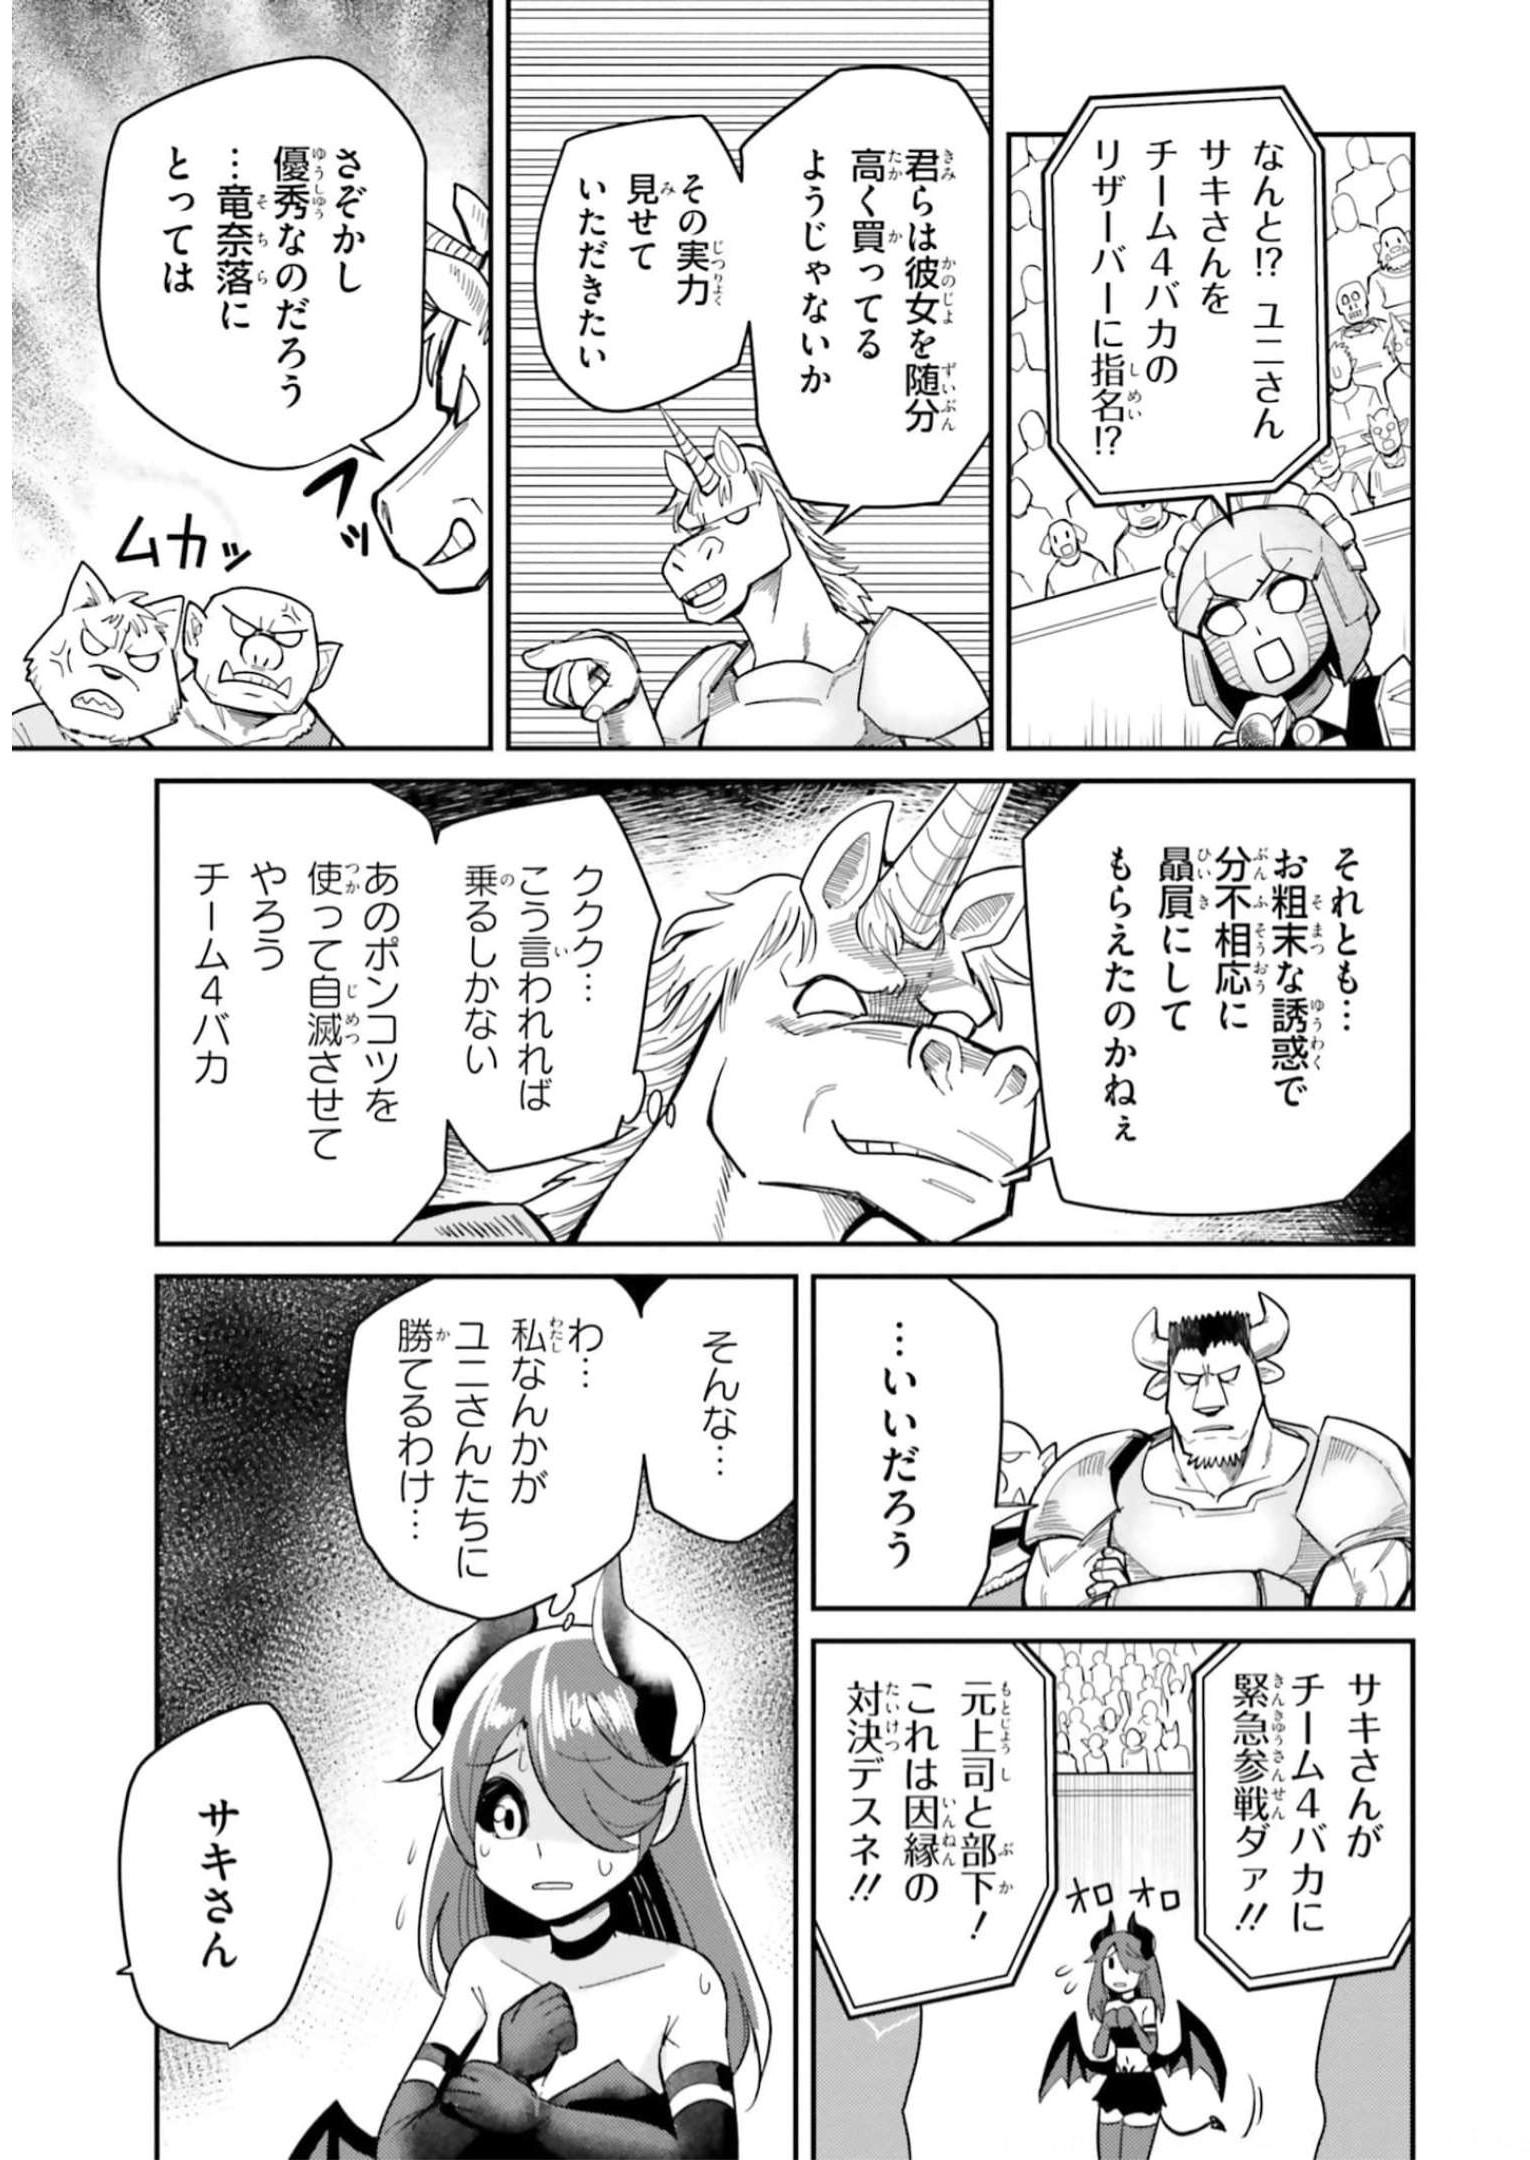 Dungeon Friends Forever Dungeon's Childhood Friend ダンジョンの幼なじみ 第20話 - Page 5